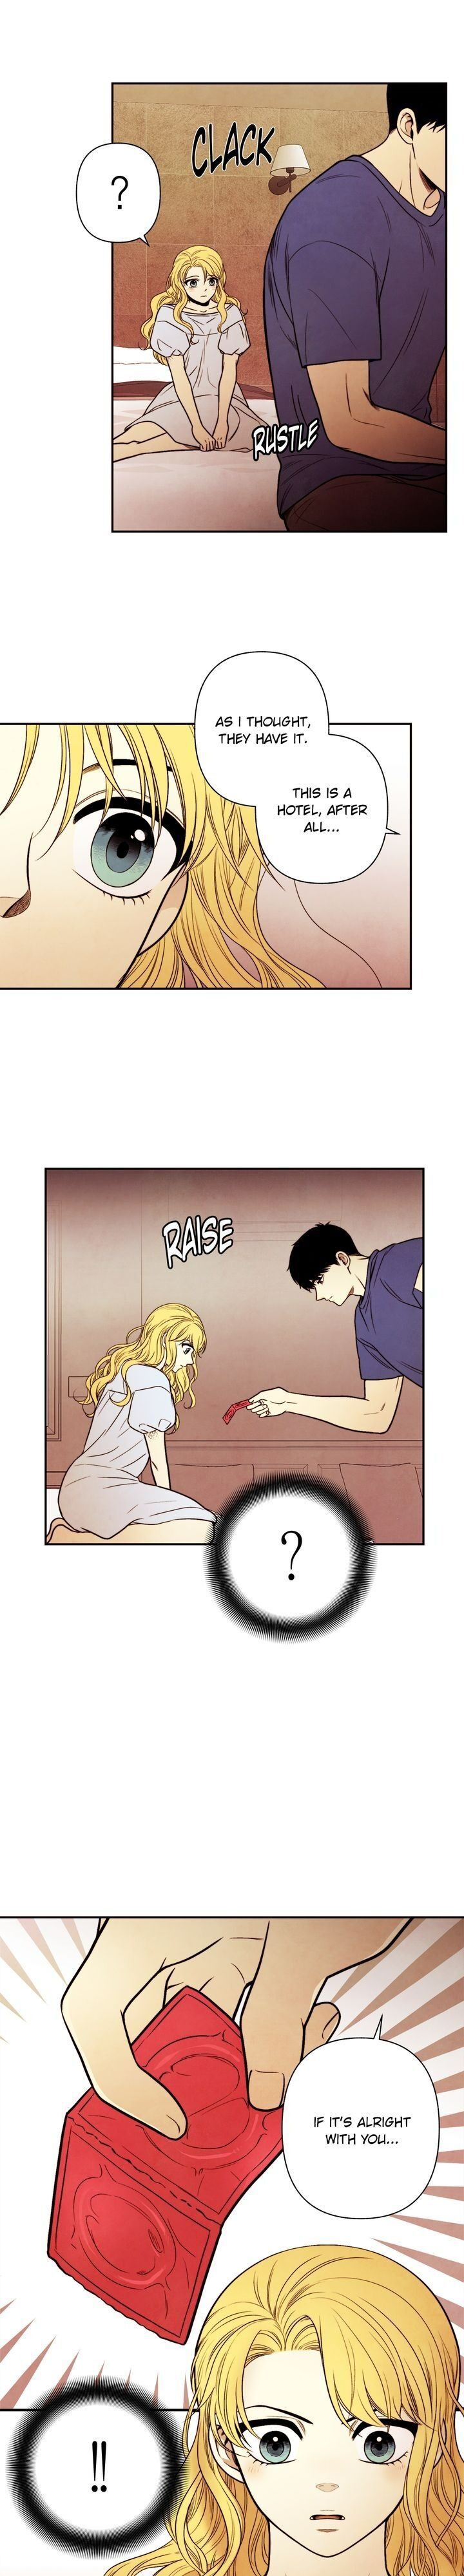 Just Give it to Me - Chapter 151 Page 3